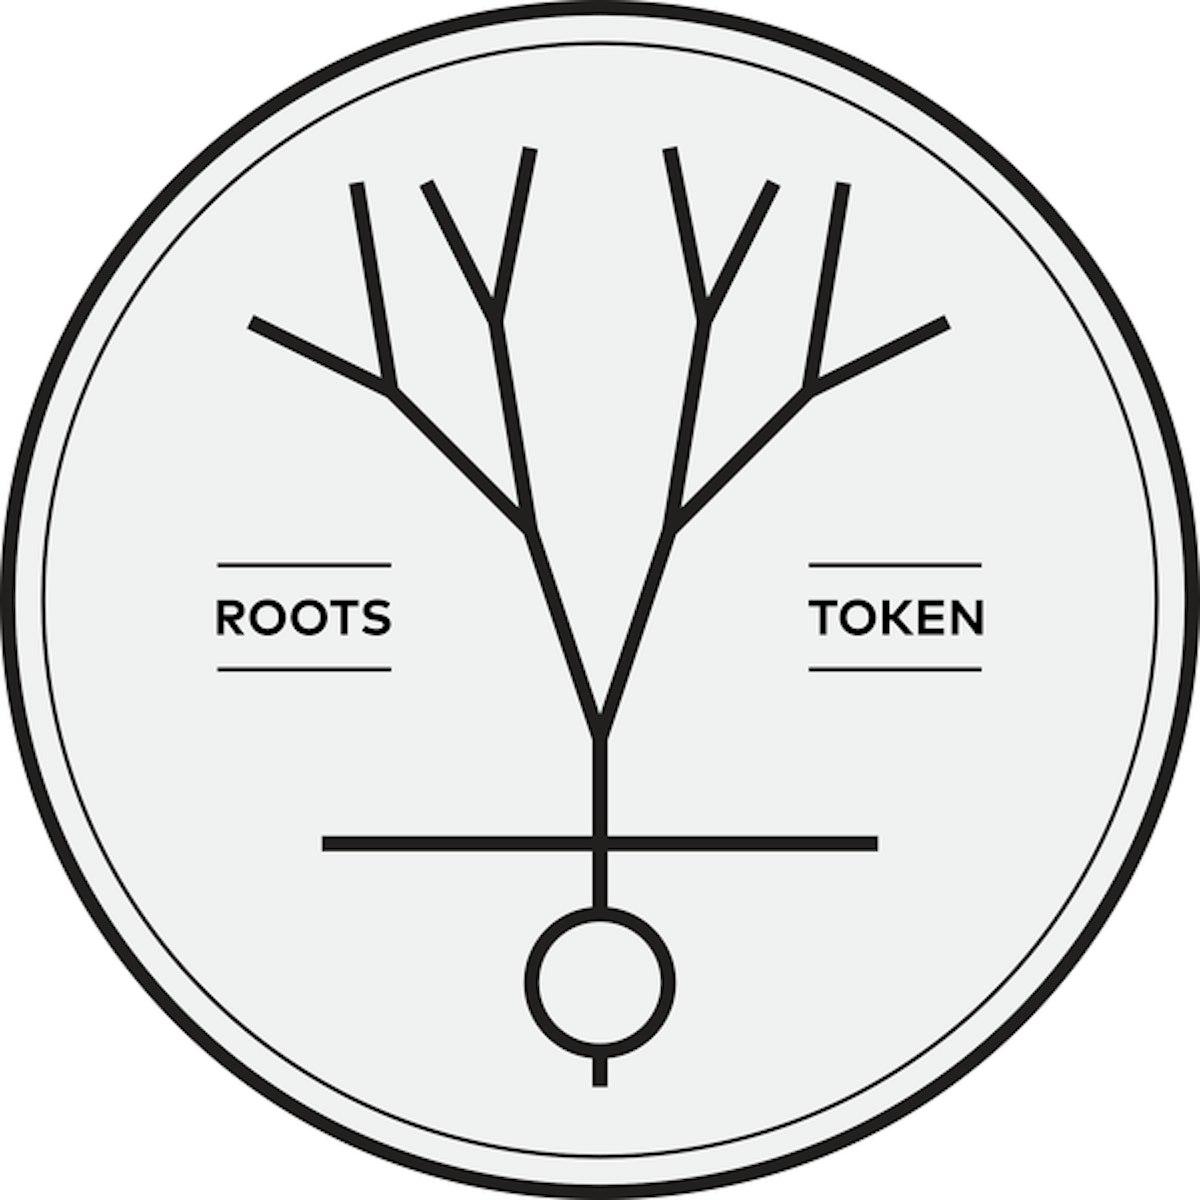 featured image - Introducing the RootProject Crowdfunding Platform, the ROOTS Token Design, and a New ICO Date